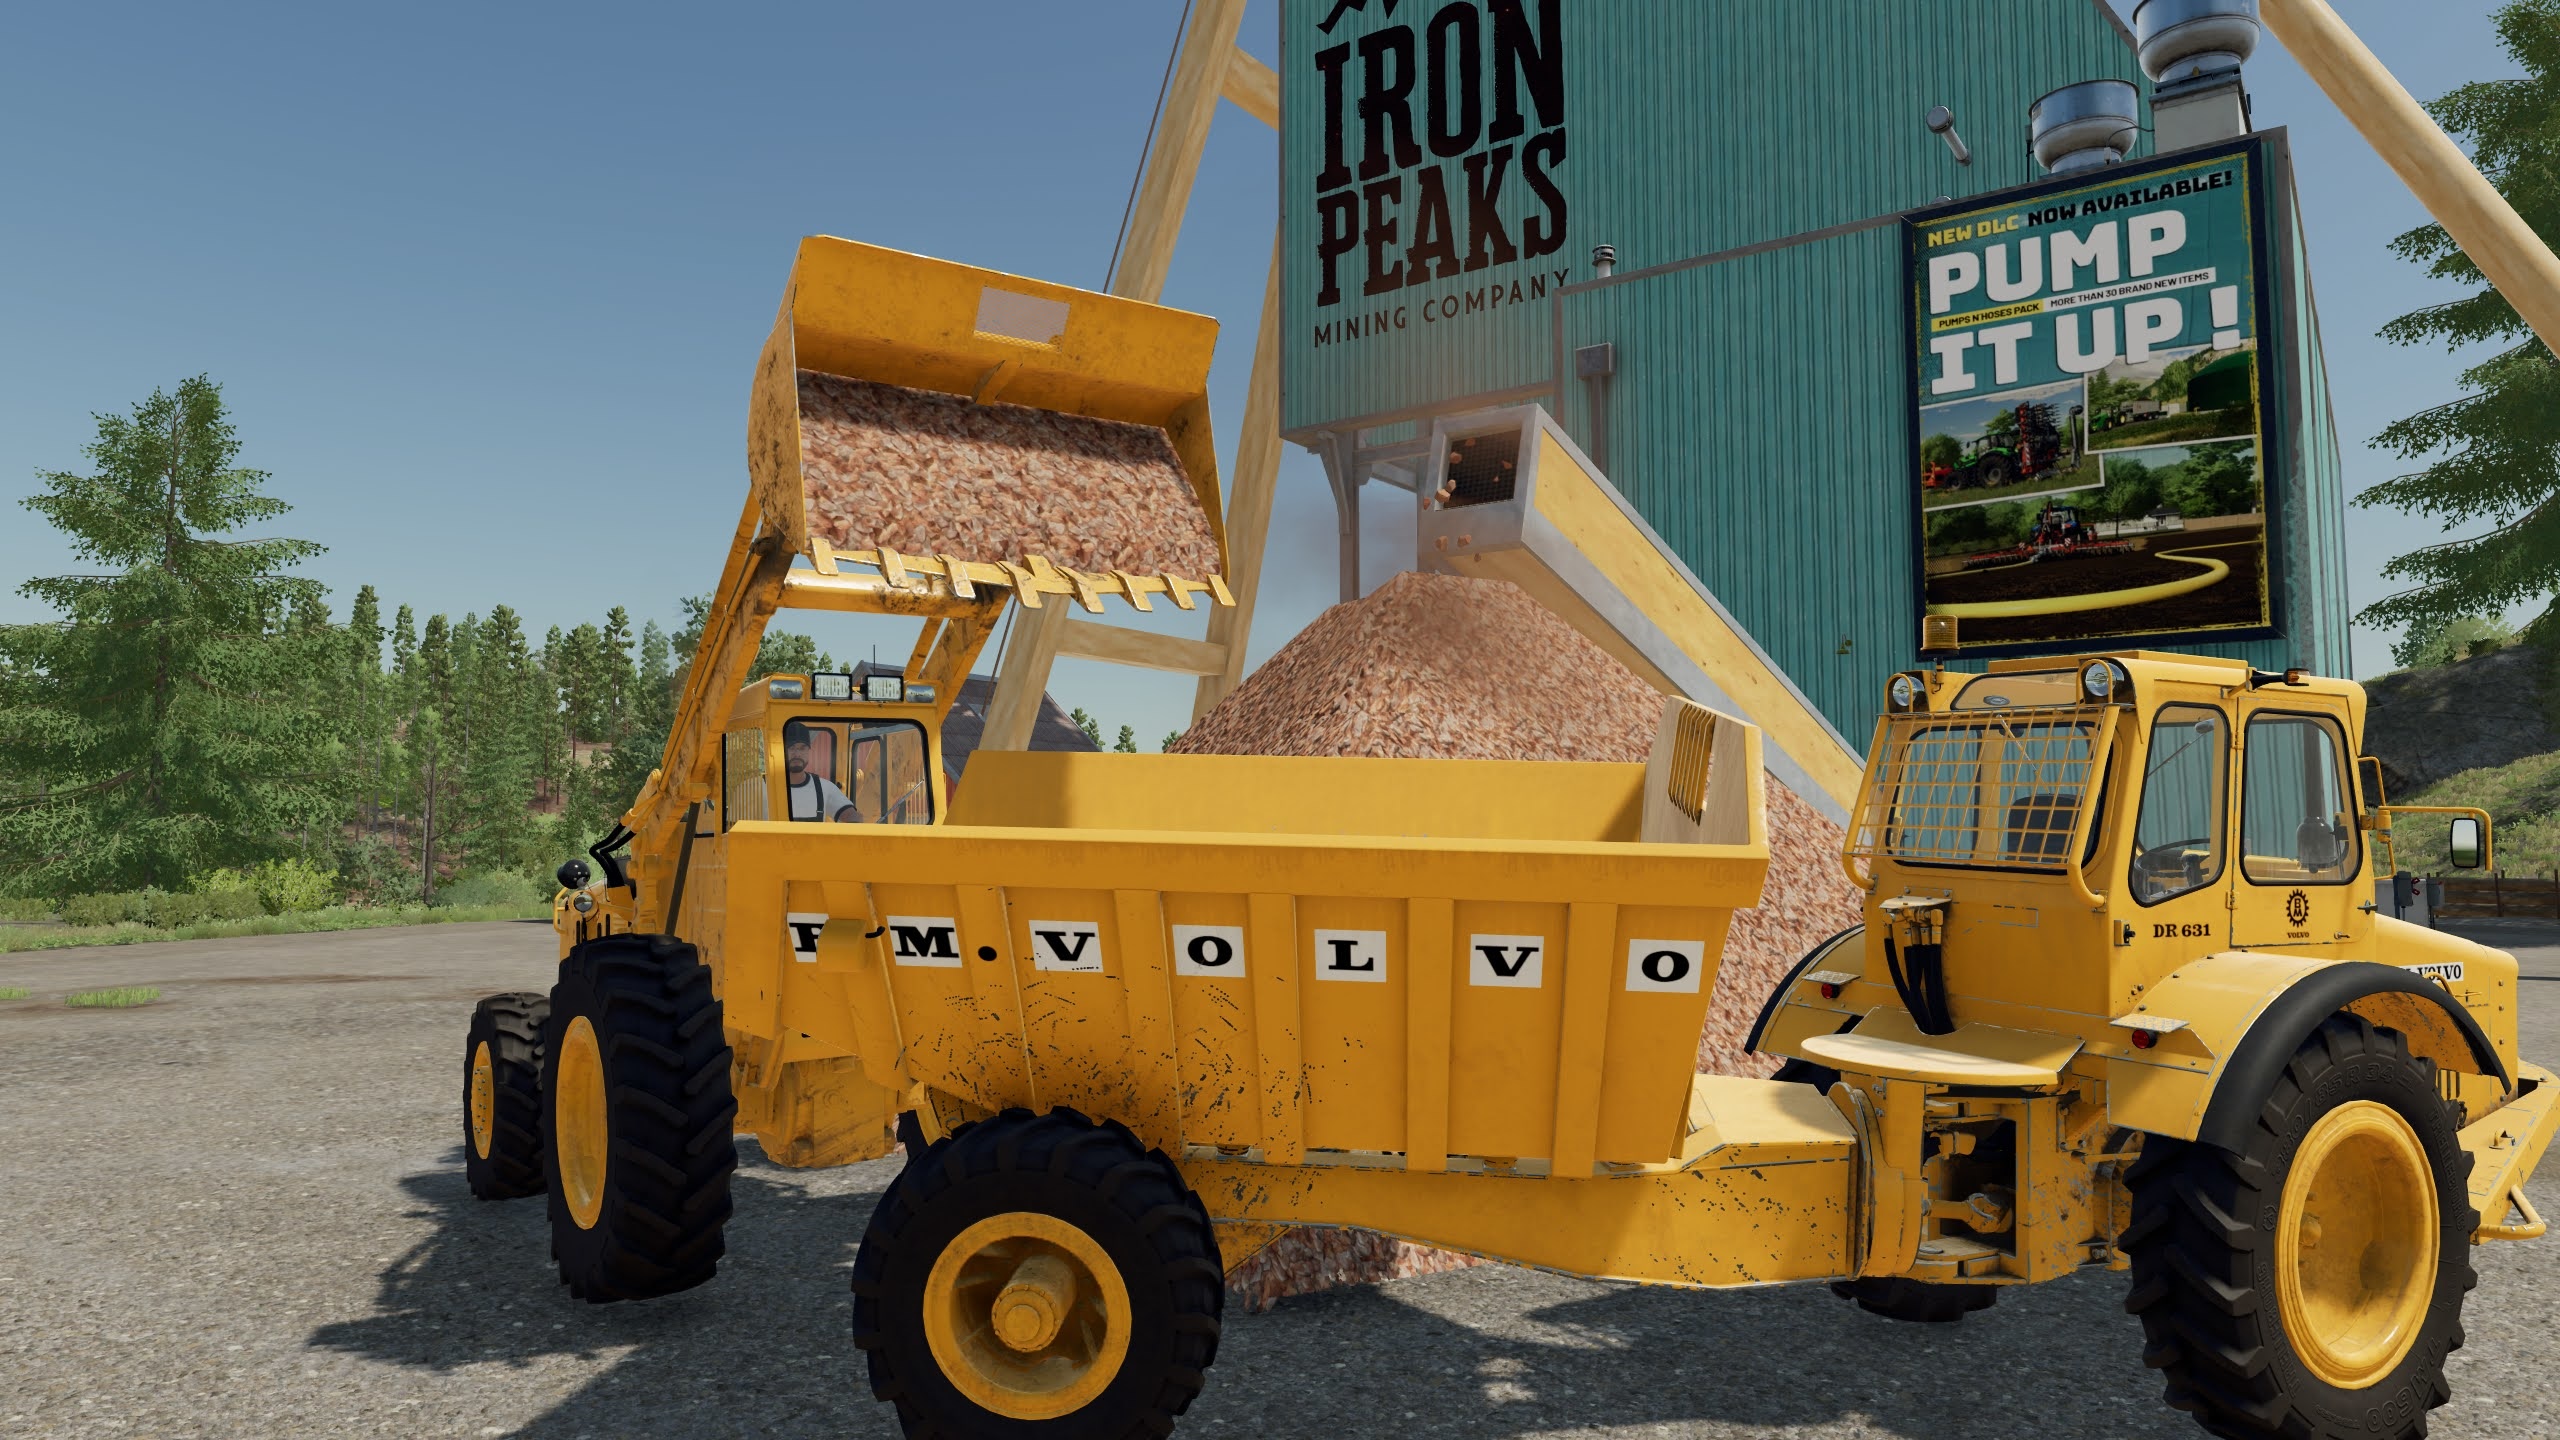 (The iron mine produces iron ore. We collect that and bring it to the production plant for processing).